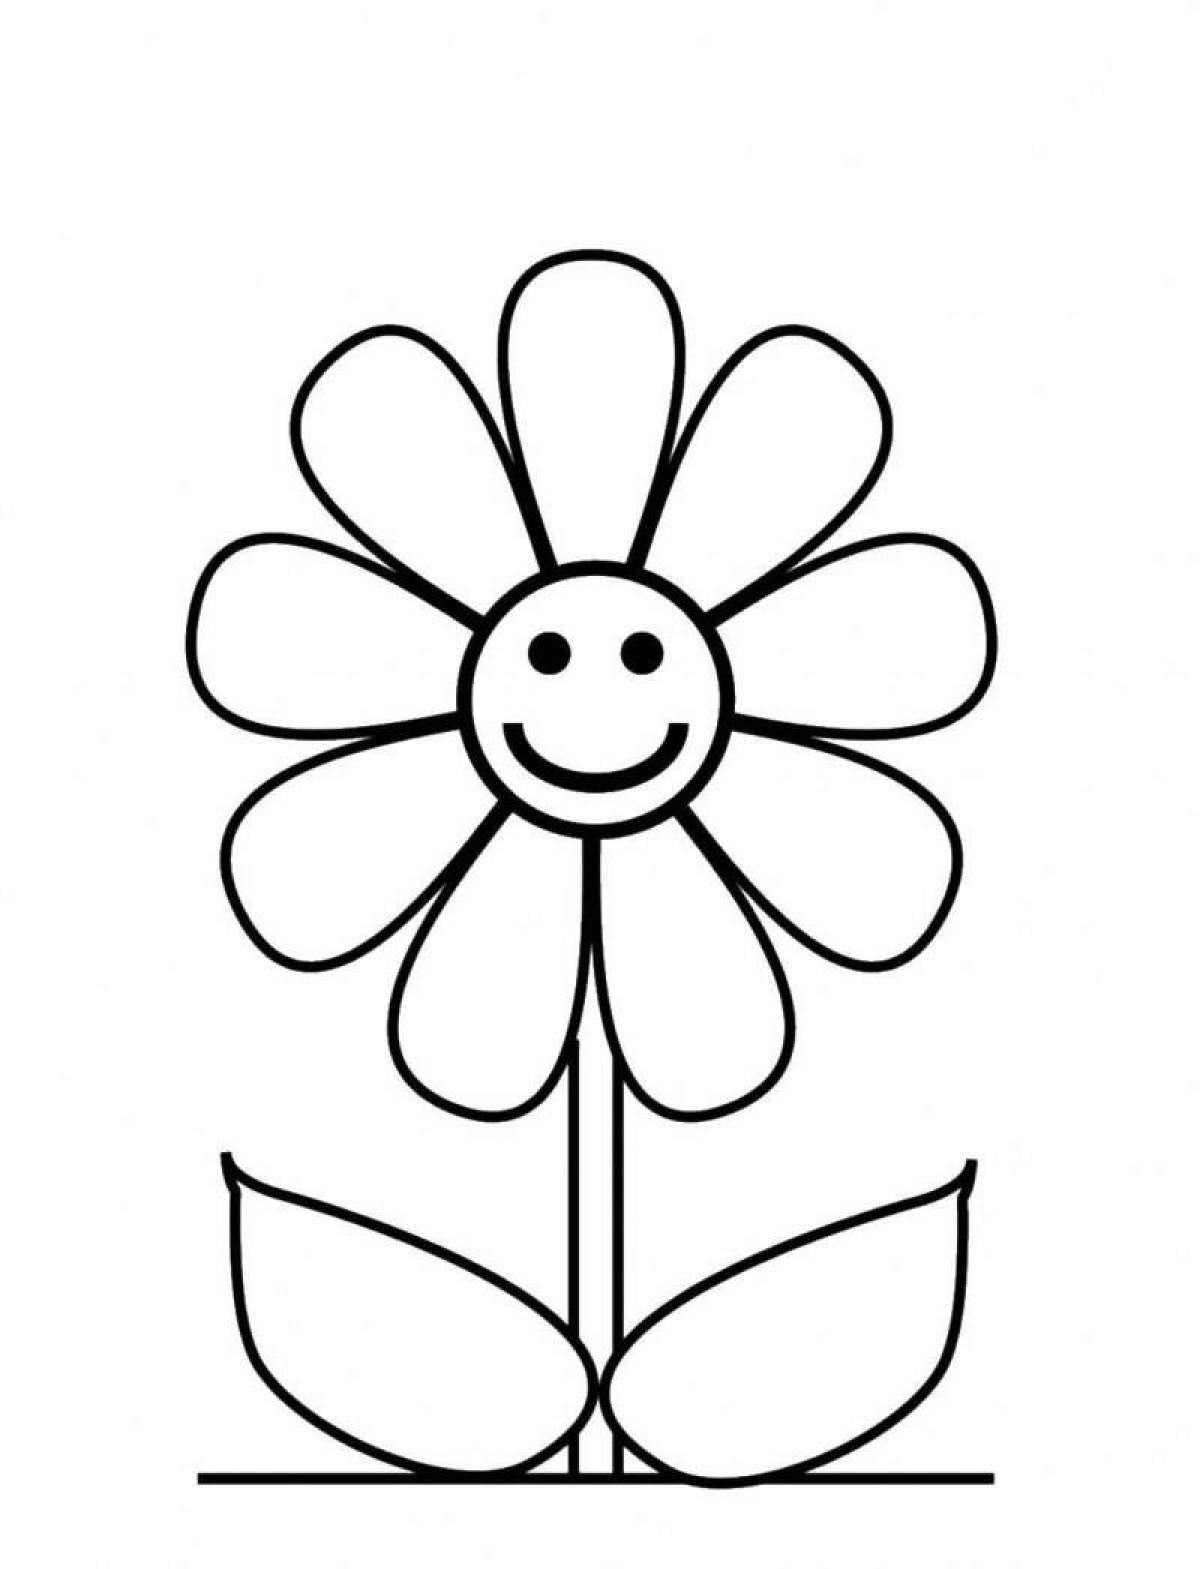 Sunny flower coloring book for kids